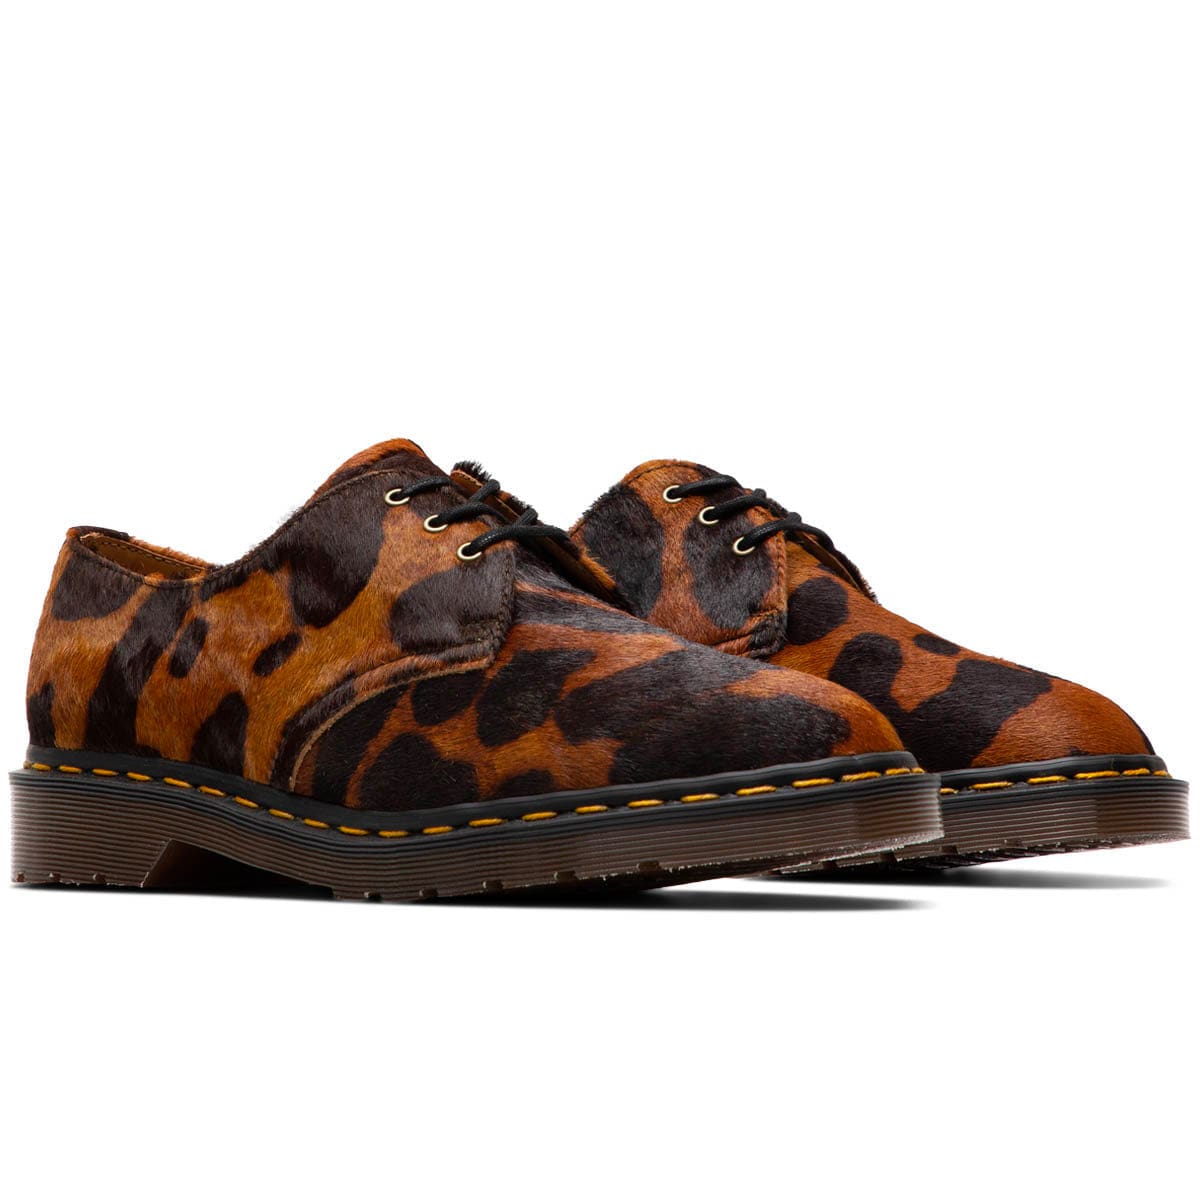 Dr. Martens Casual 1461